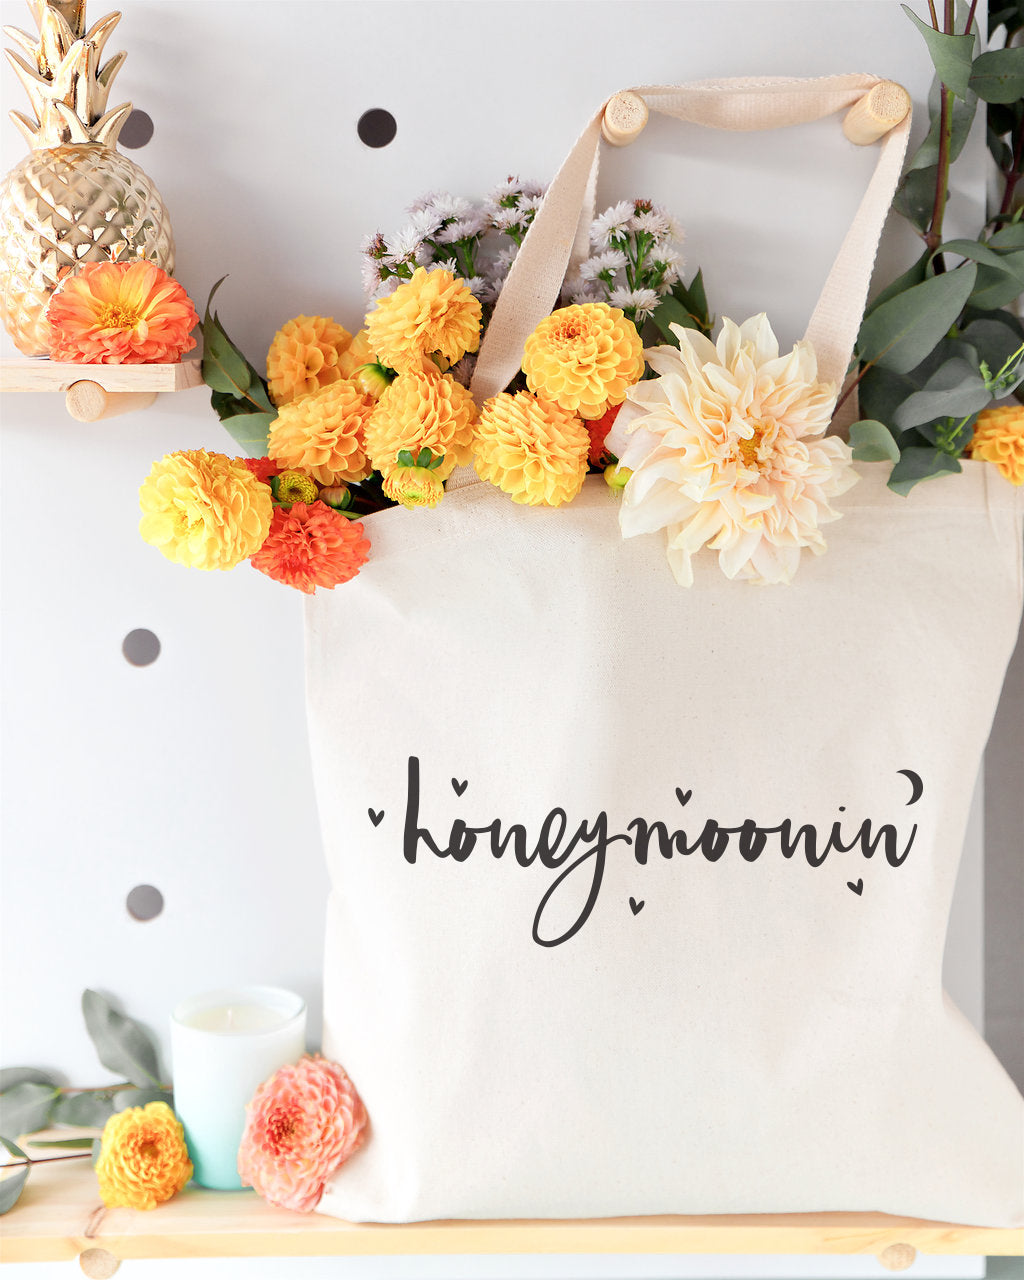 Honeymoonin' Wedding Cotton Canvas Tote Bag by The Cotton & Canvas Co.